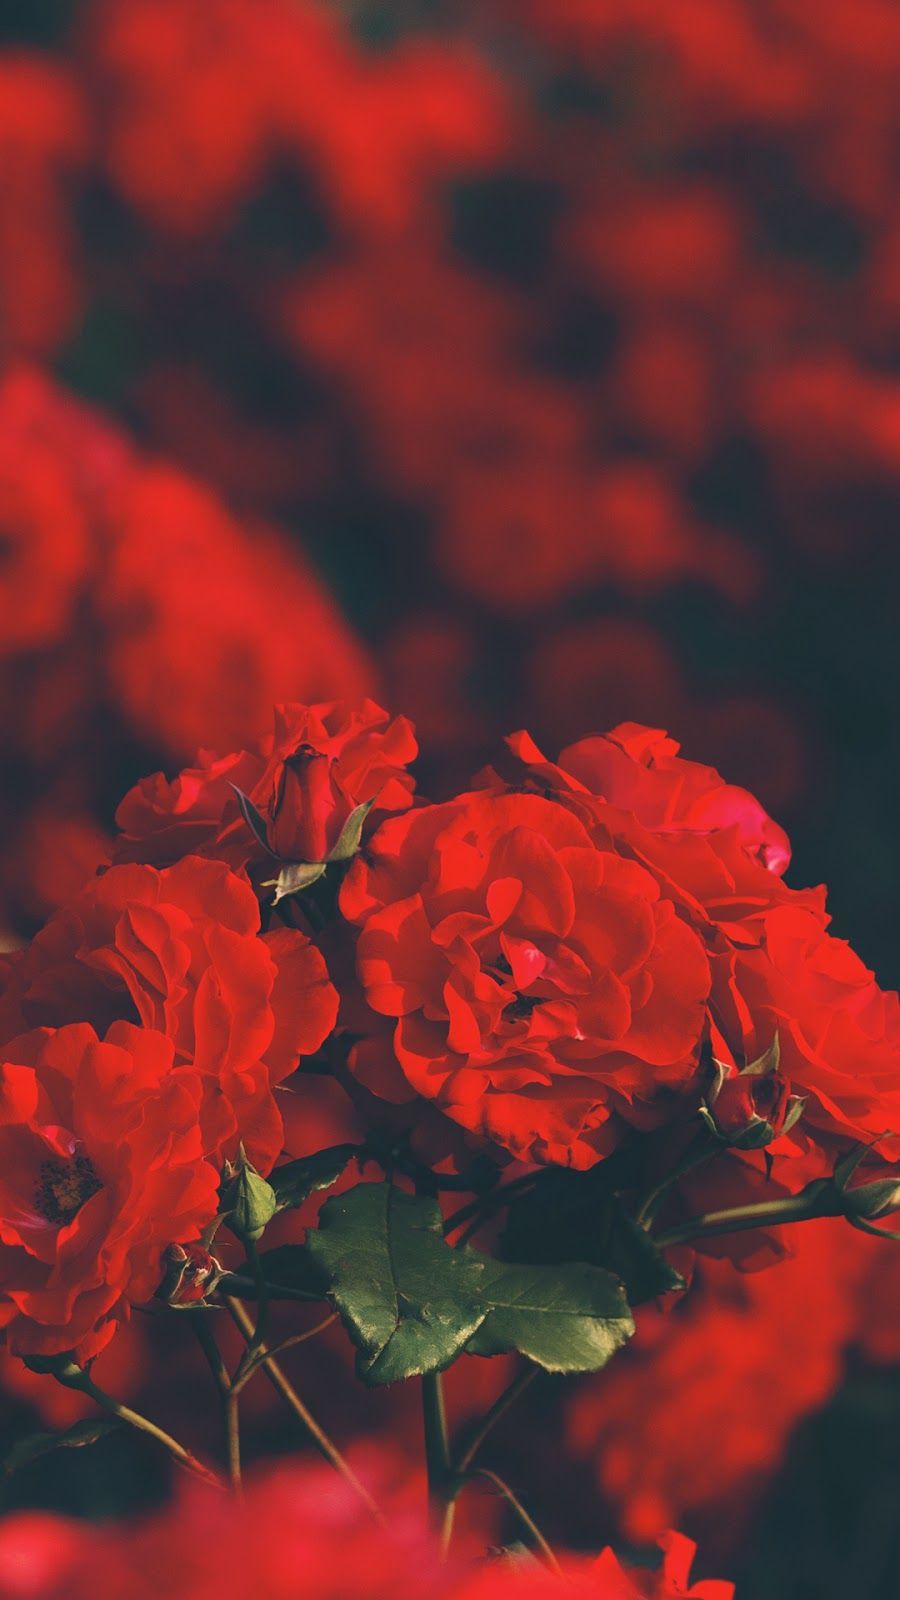 red rose wallpaper. Rose wallpaper, Red wallpaper, Red roses